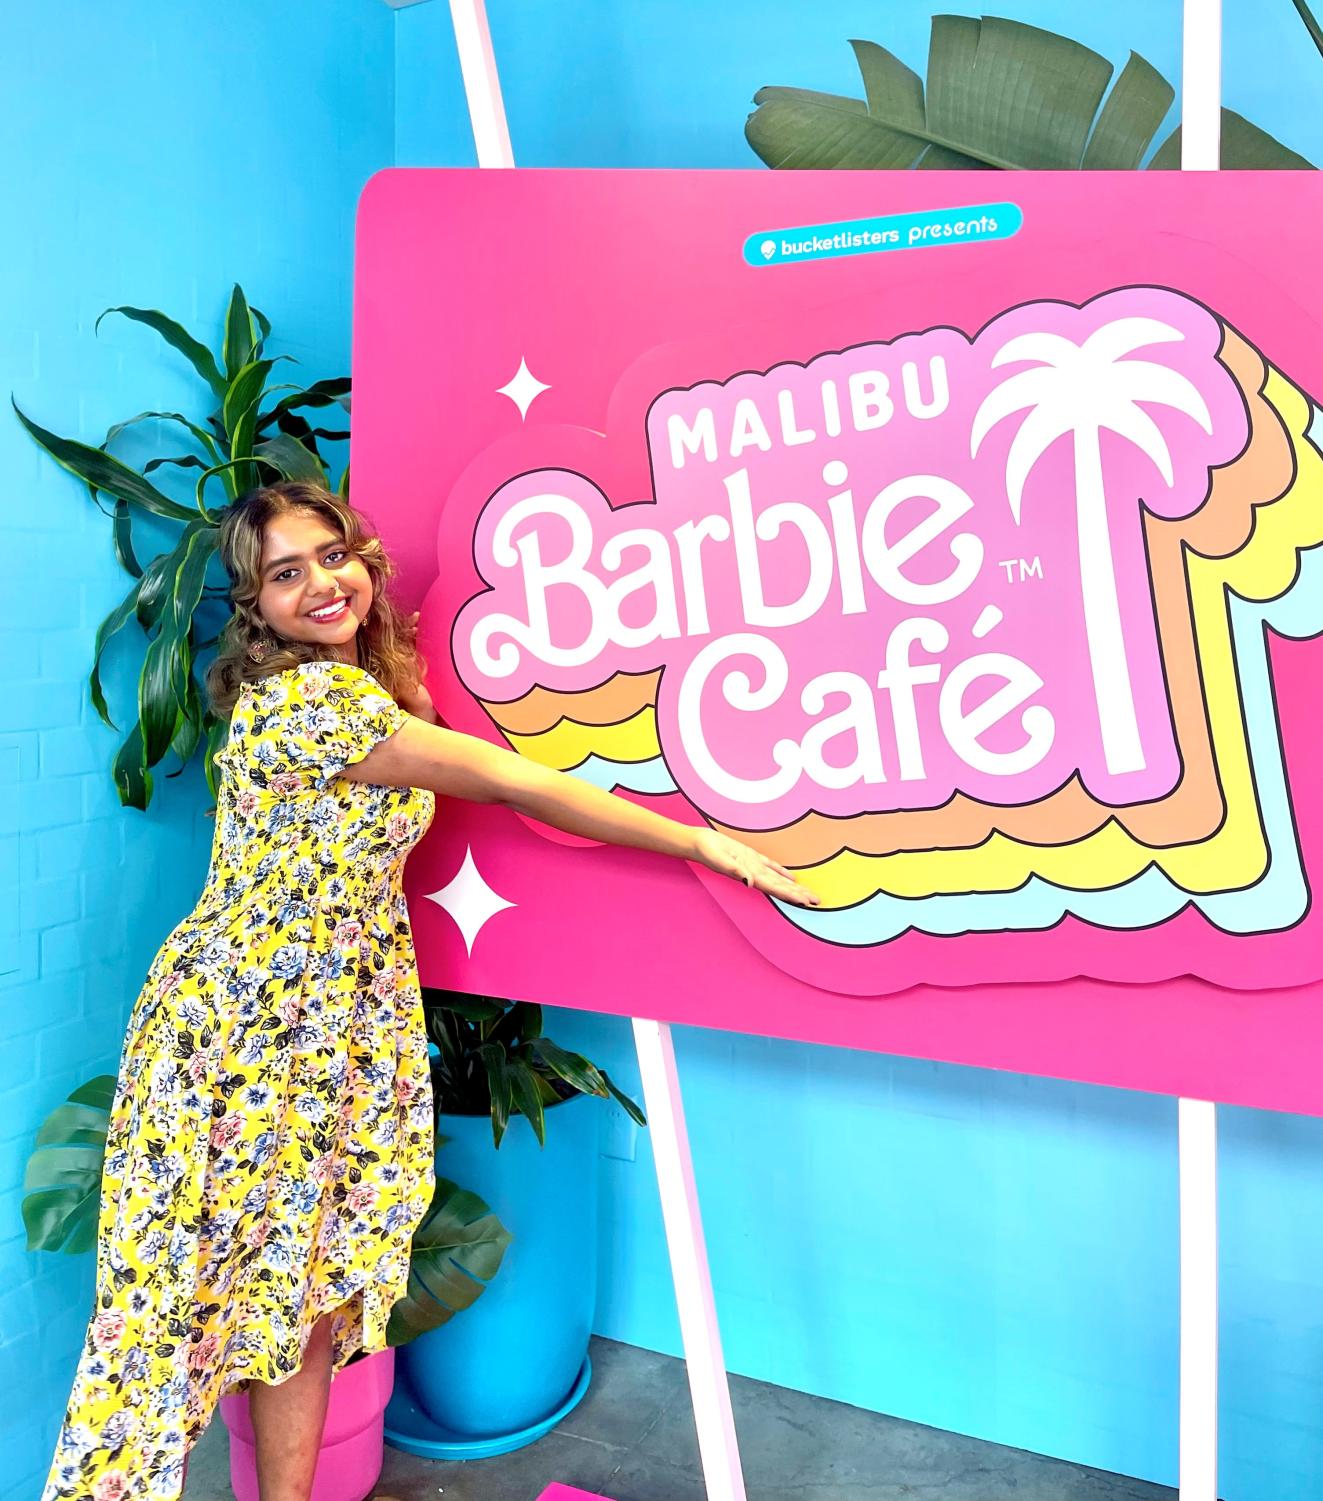 The Malibu Barbie Café Just Opened — And We Got a First Look